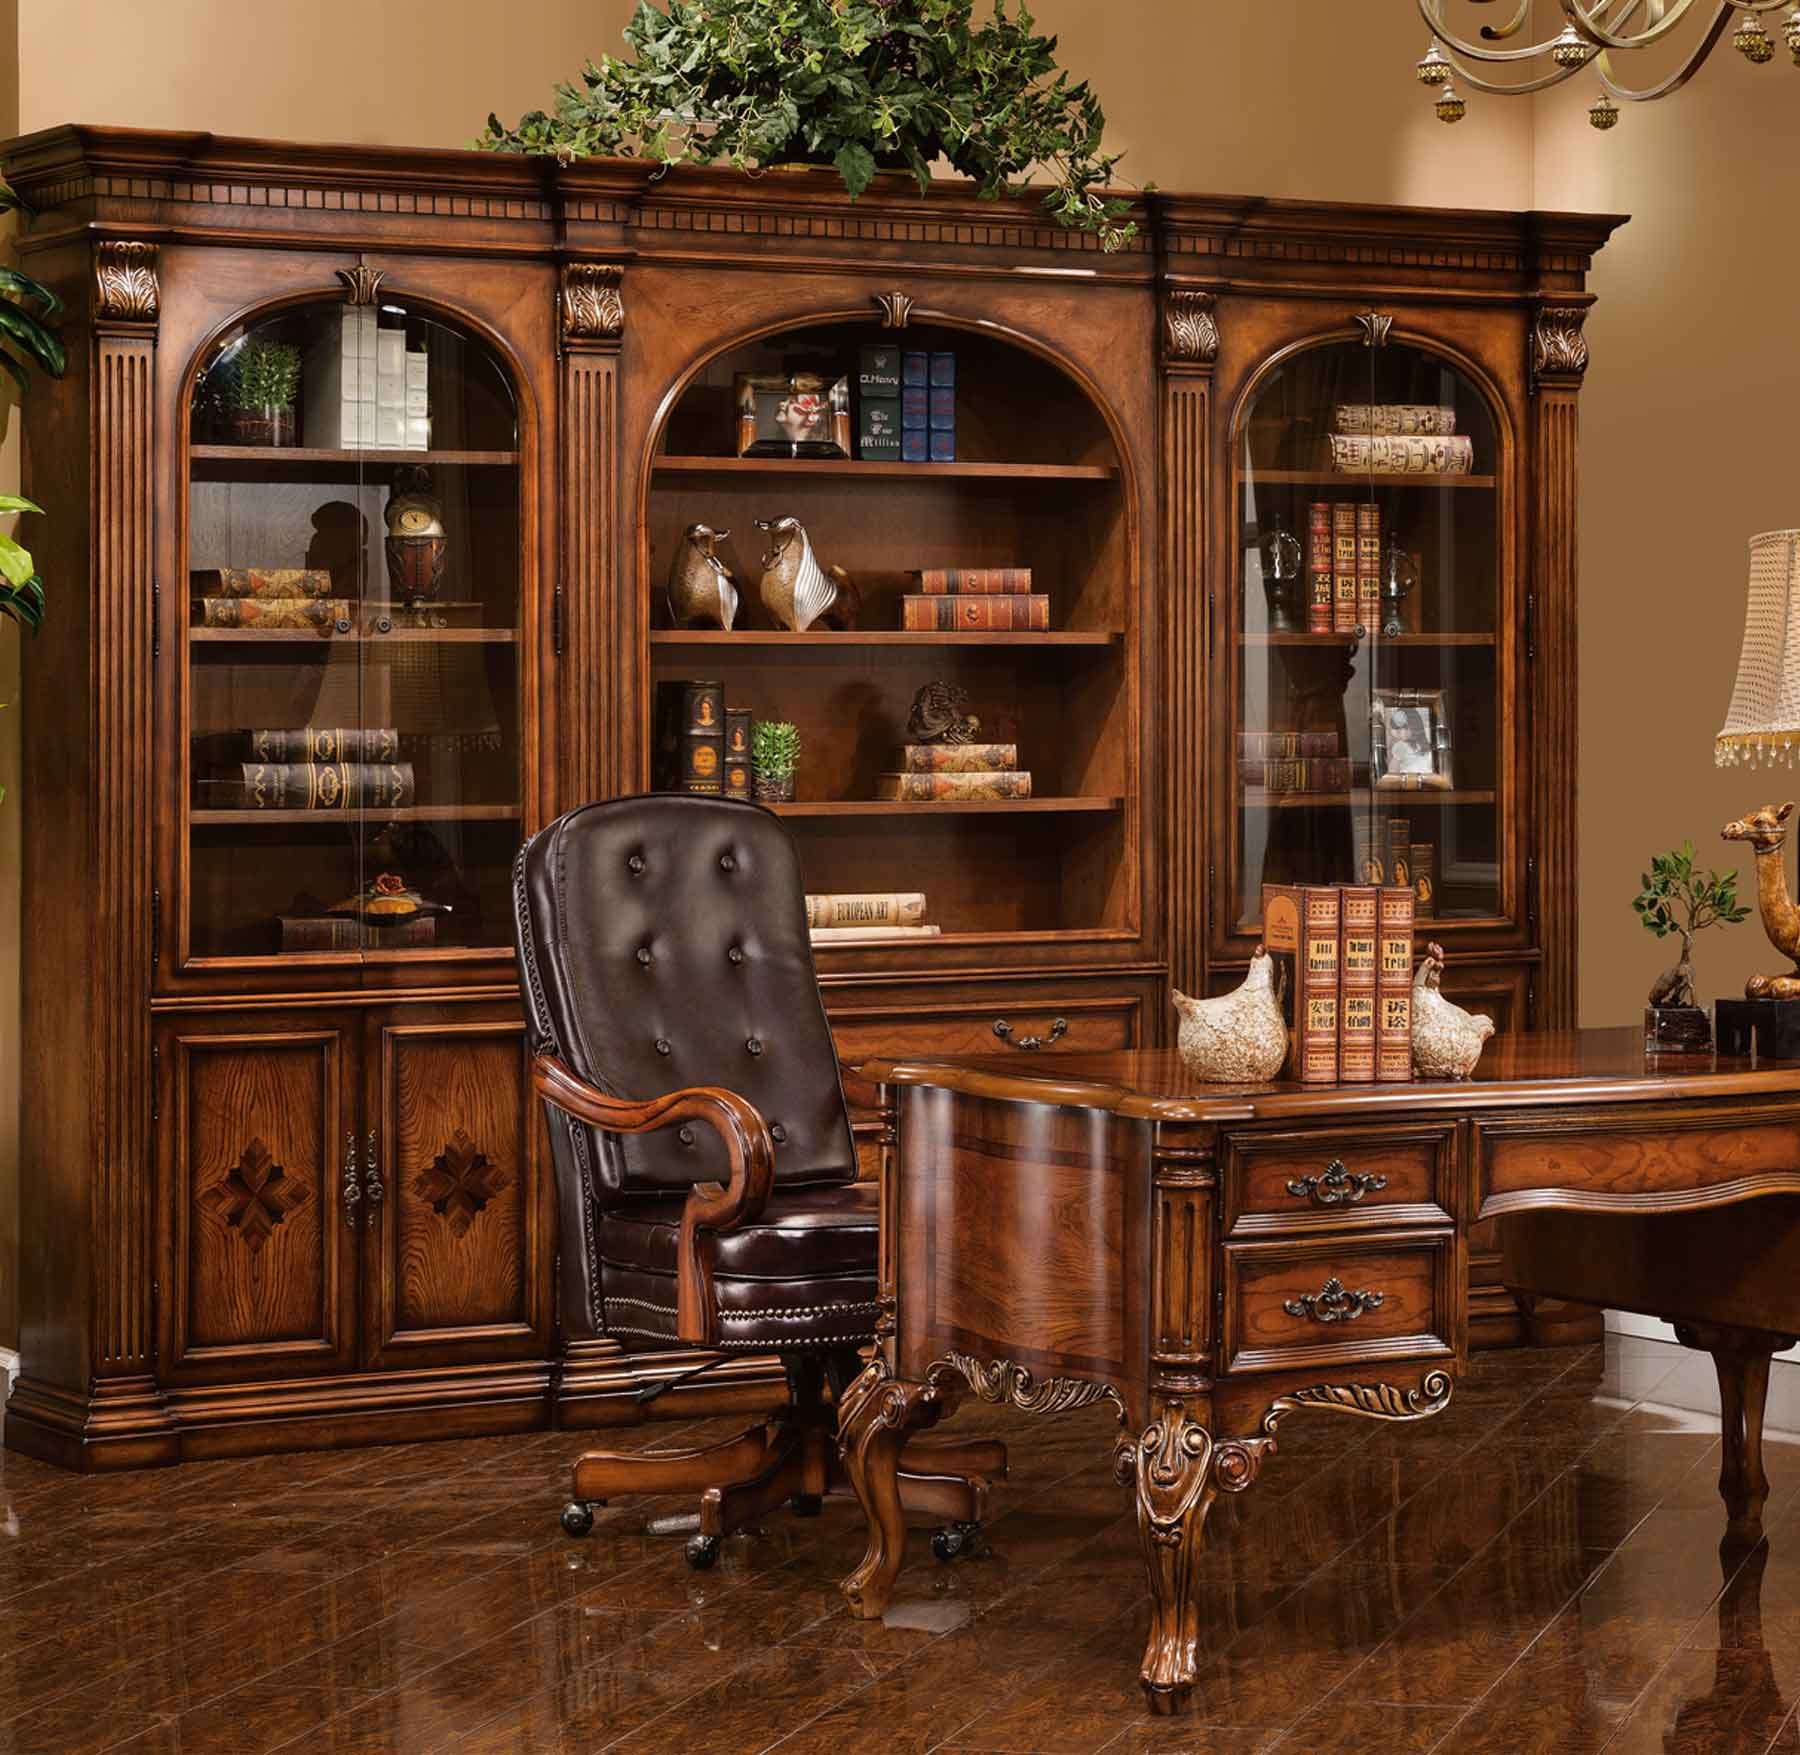 Melville Wall Unit / Book Case shown in Antique Cognac finish